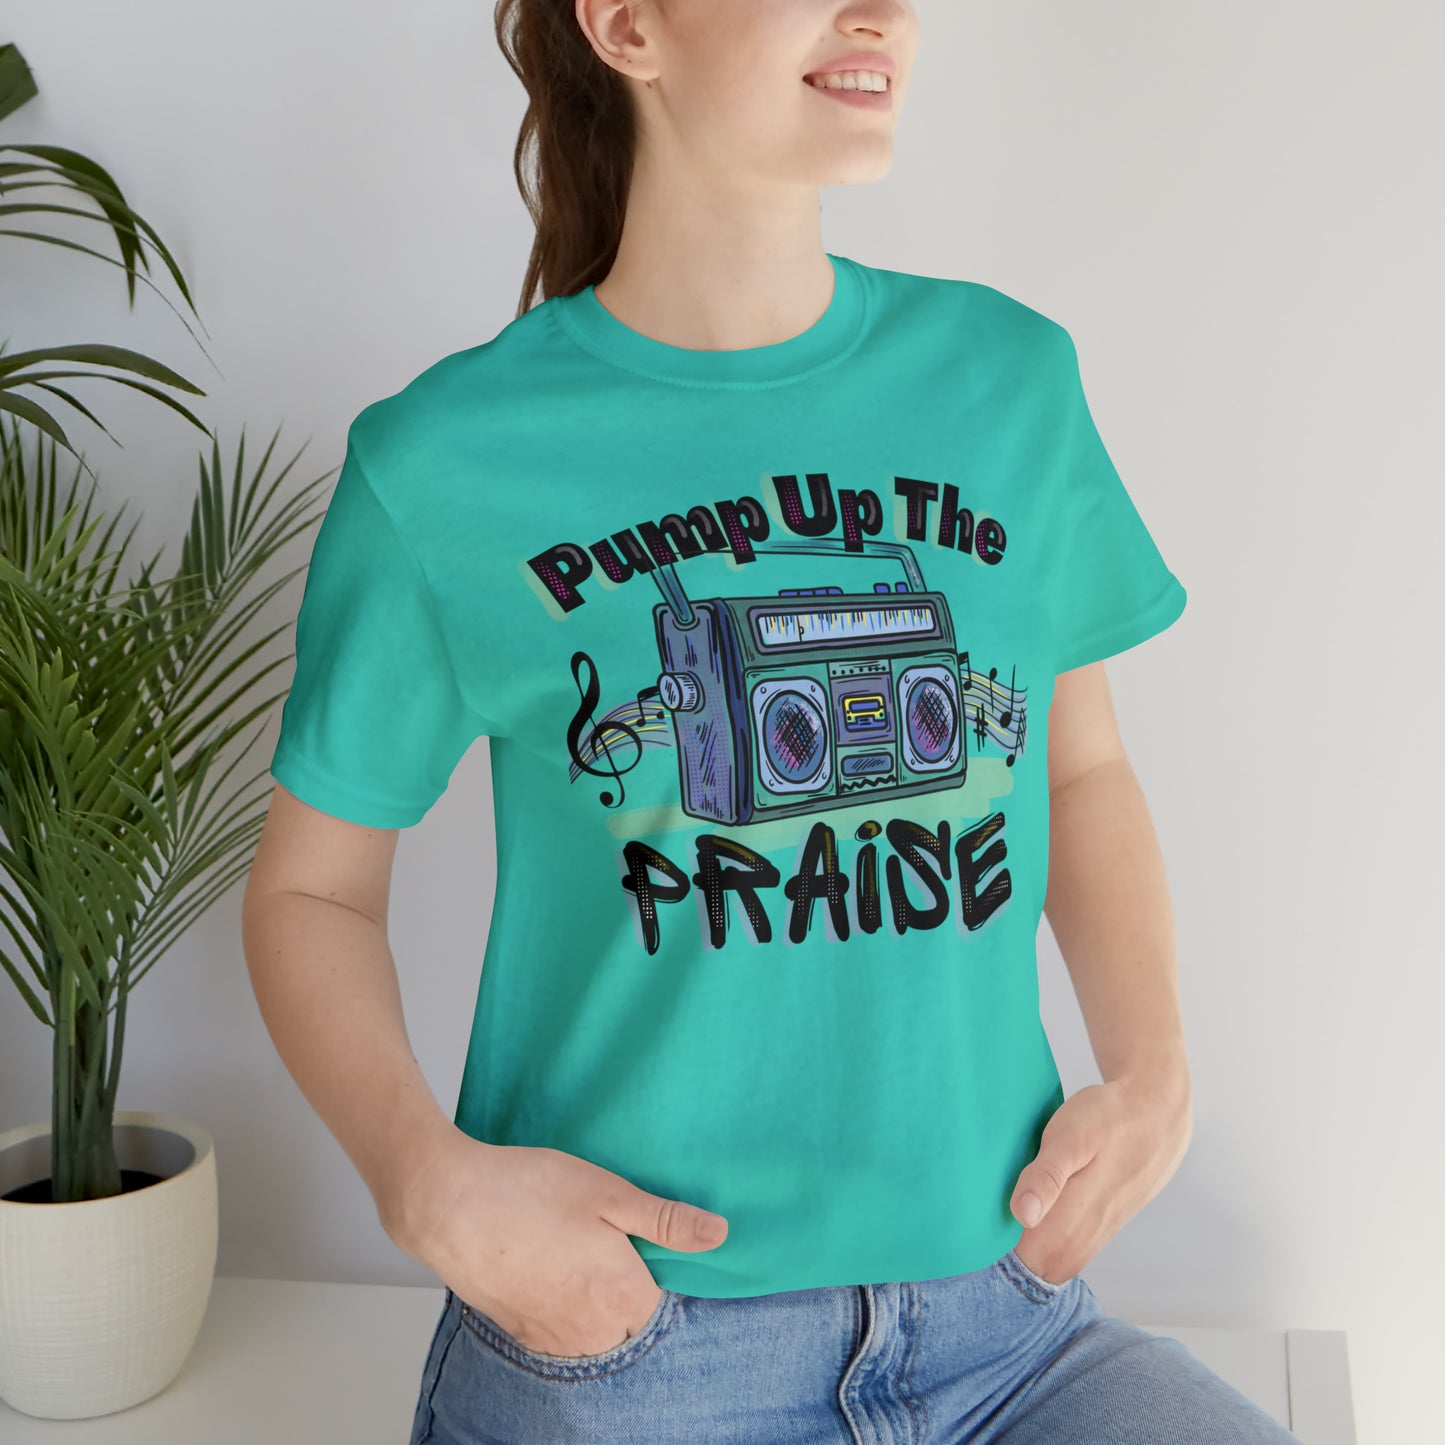 Pump Up The Praise (Green Pastures Apparel)